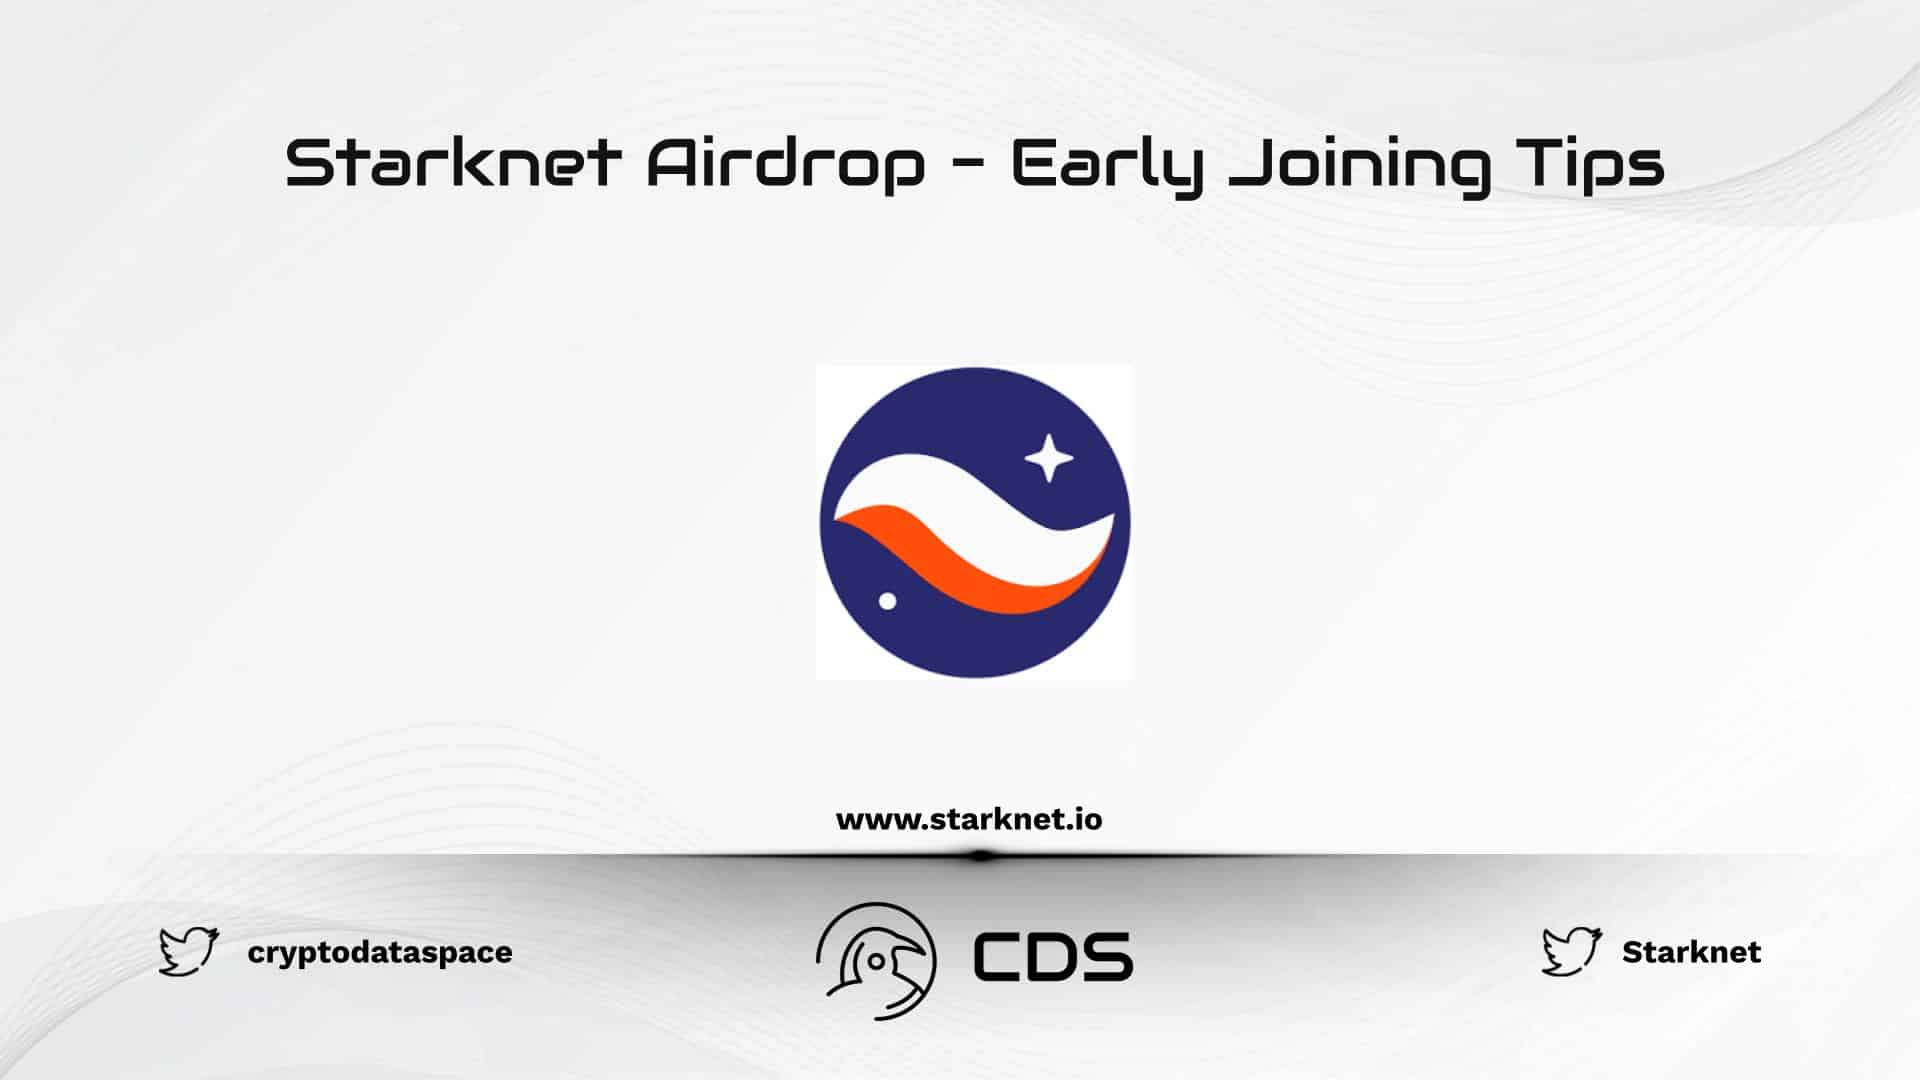 Starknet Airdrop - Early Joining Tips